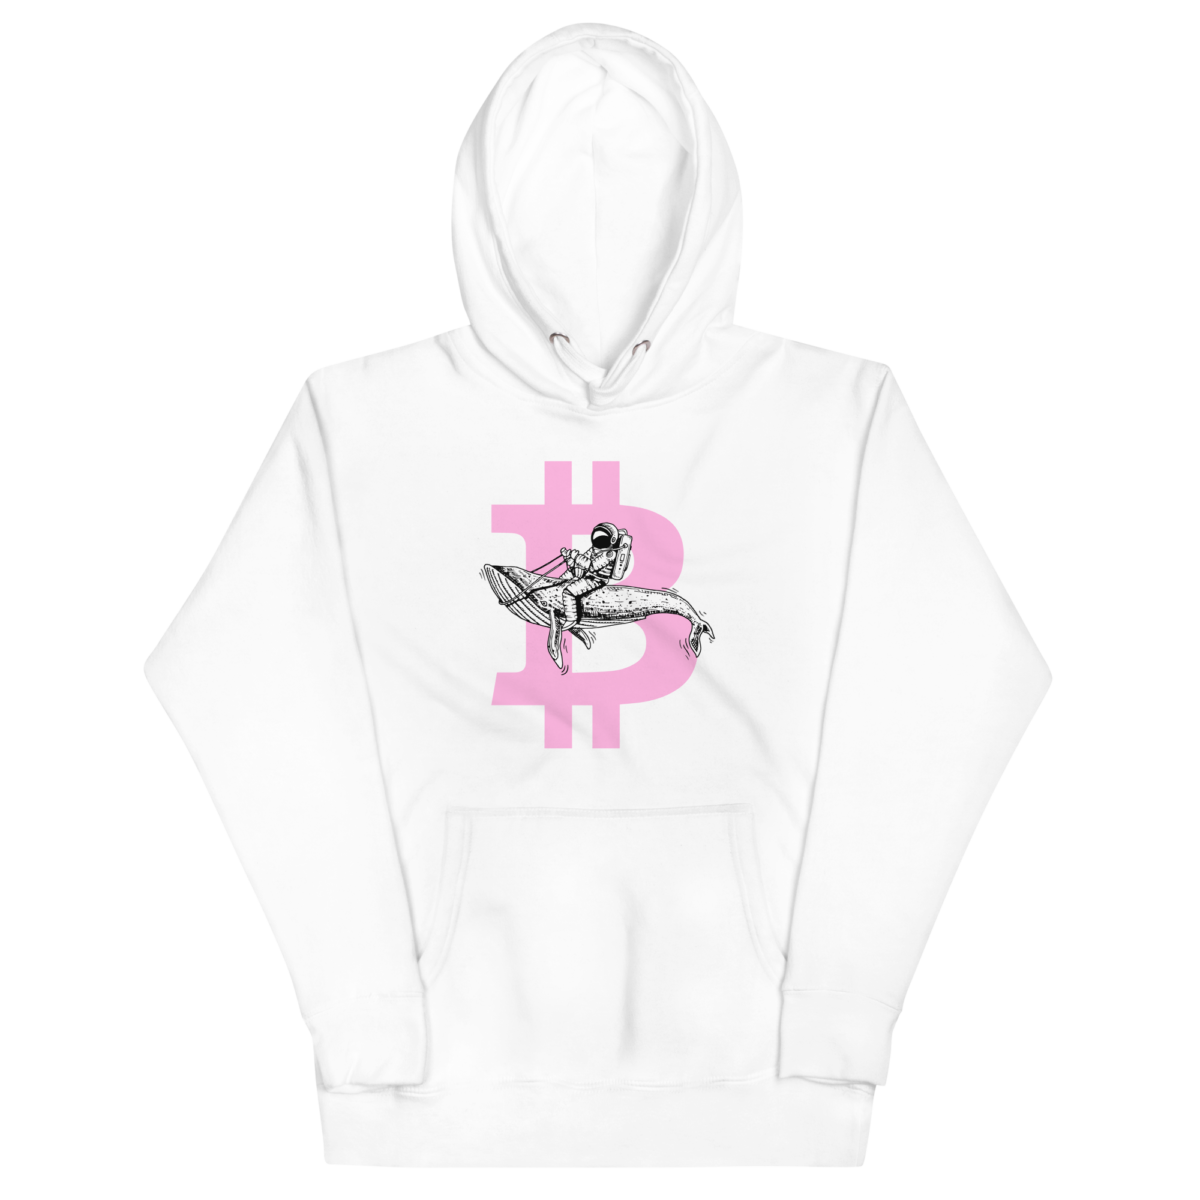 unisex premium hoodie white front 6321f49841382 - Bitcoin x Astronaut Flying Whale Hoodie